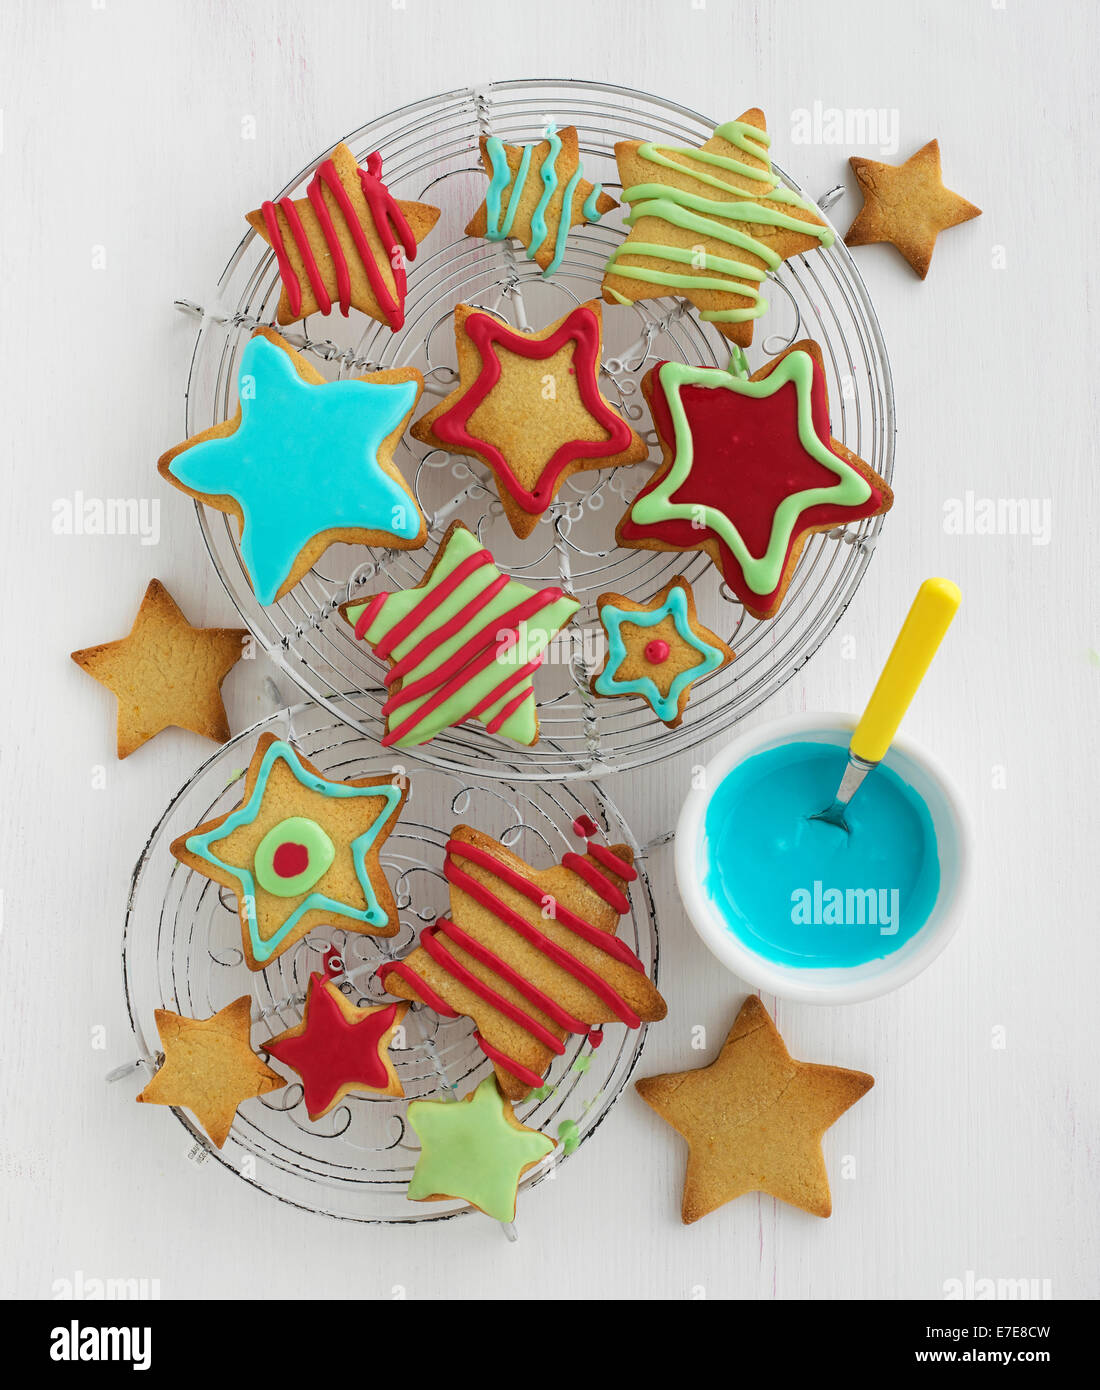 Star shaped biscuits with colored icing Stock Photo